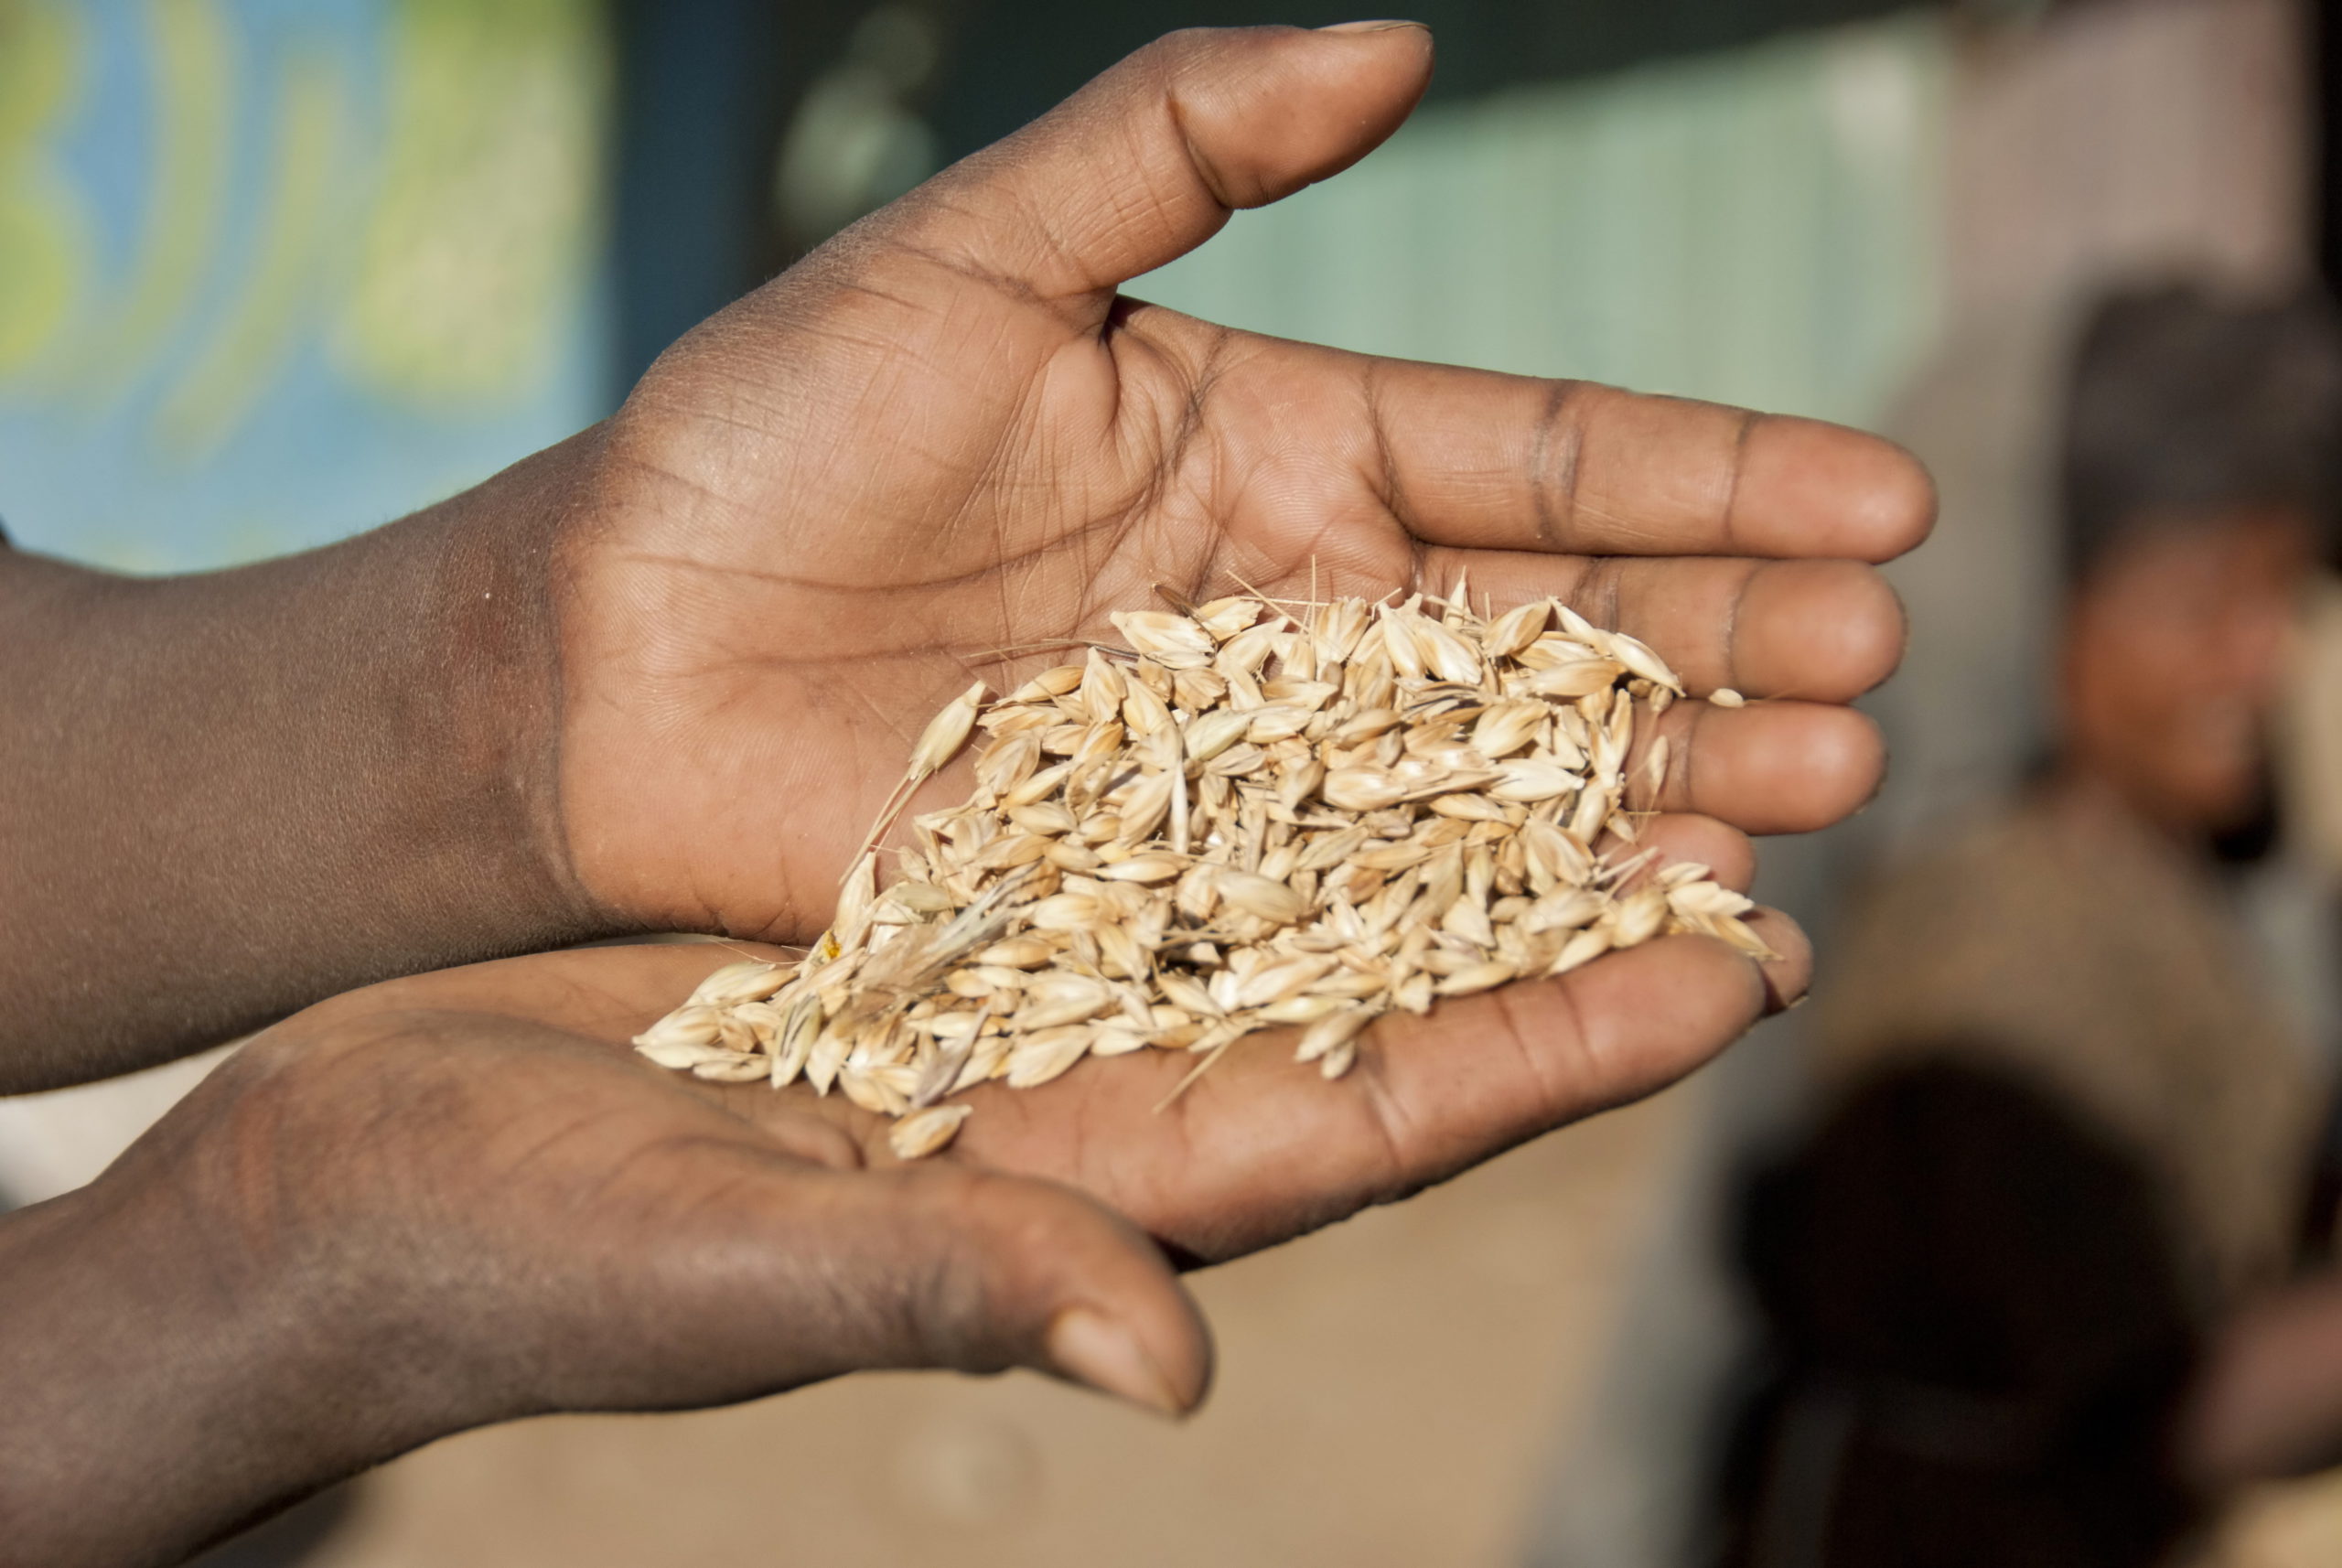 Increasing the development of and access to safe and nutritious food in Africa